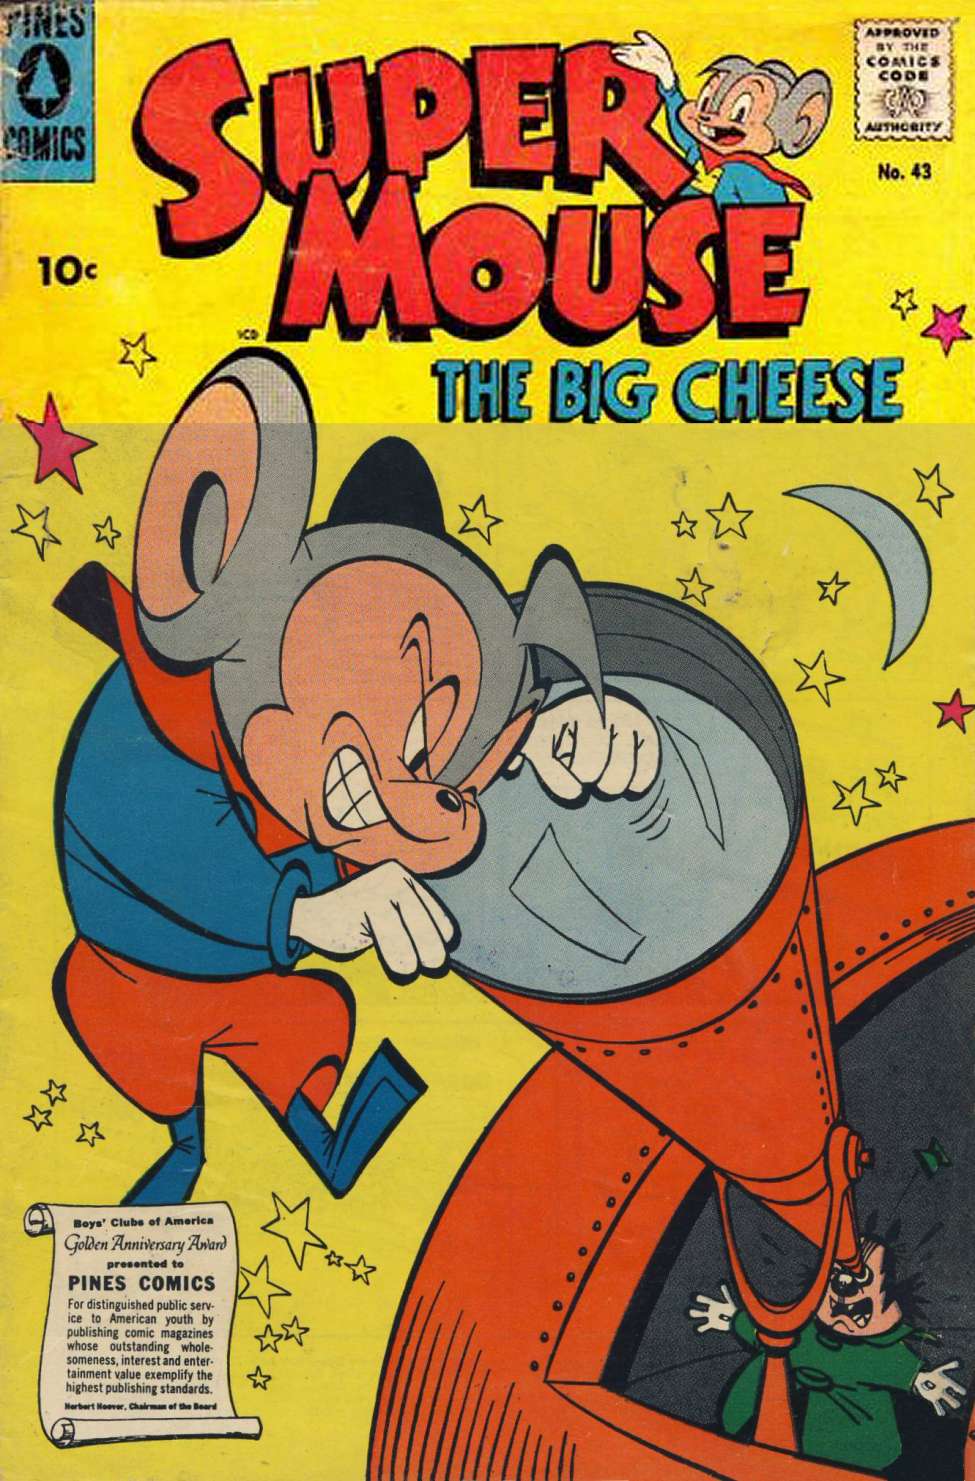 Book Cover For Supermouse 43 - Version 1